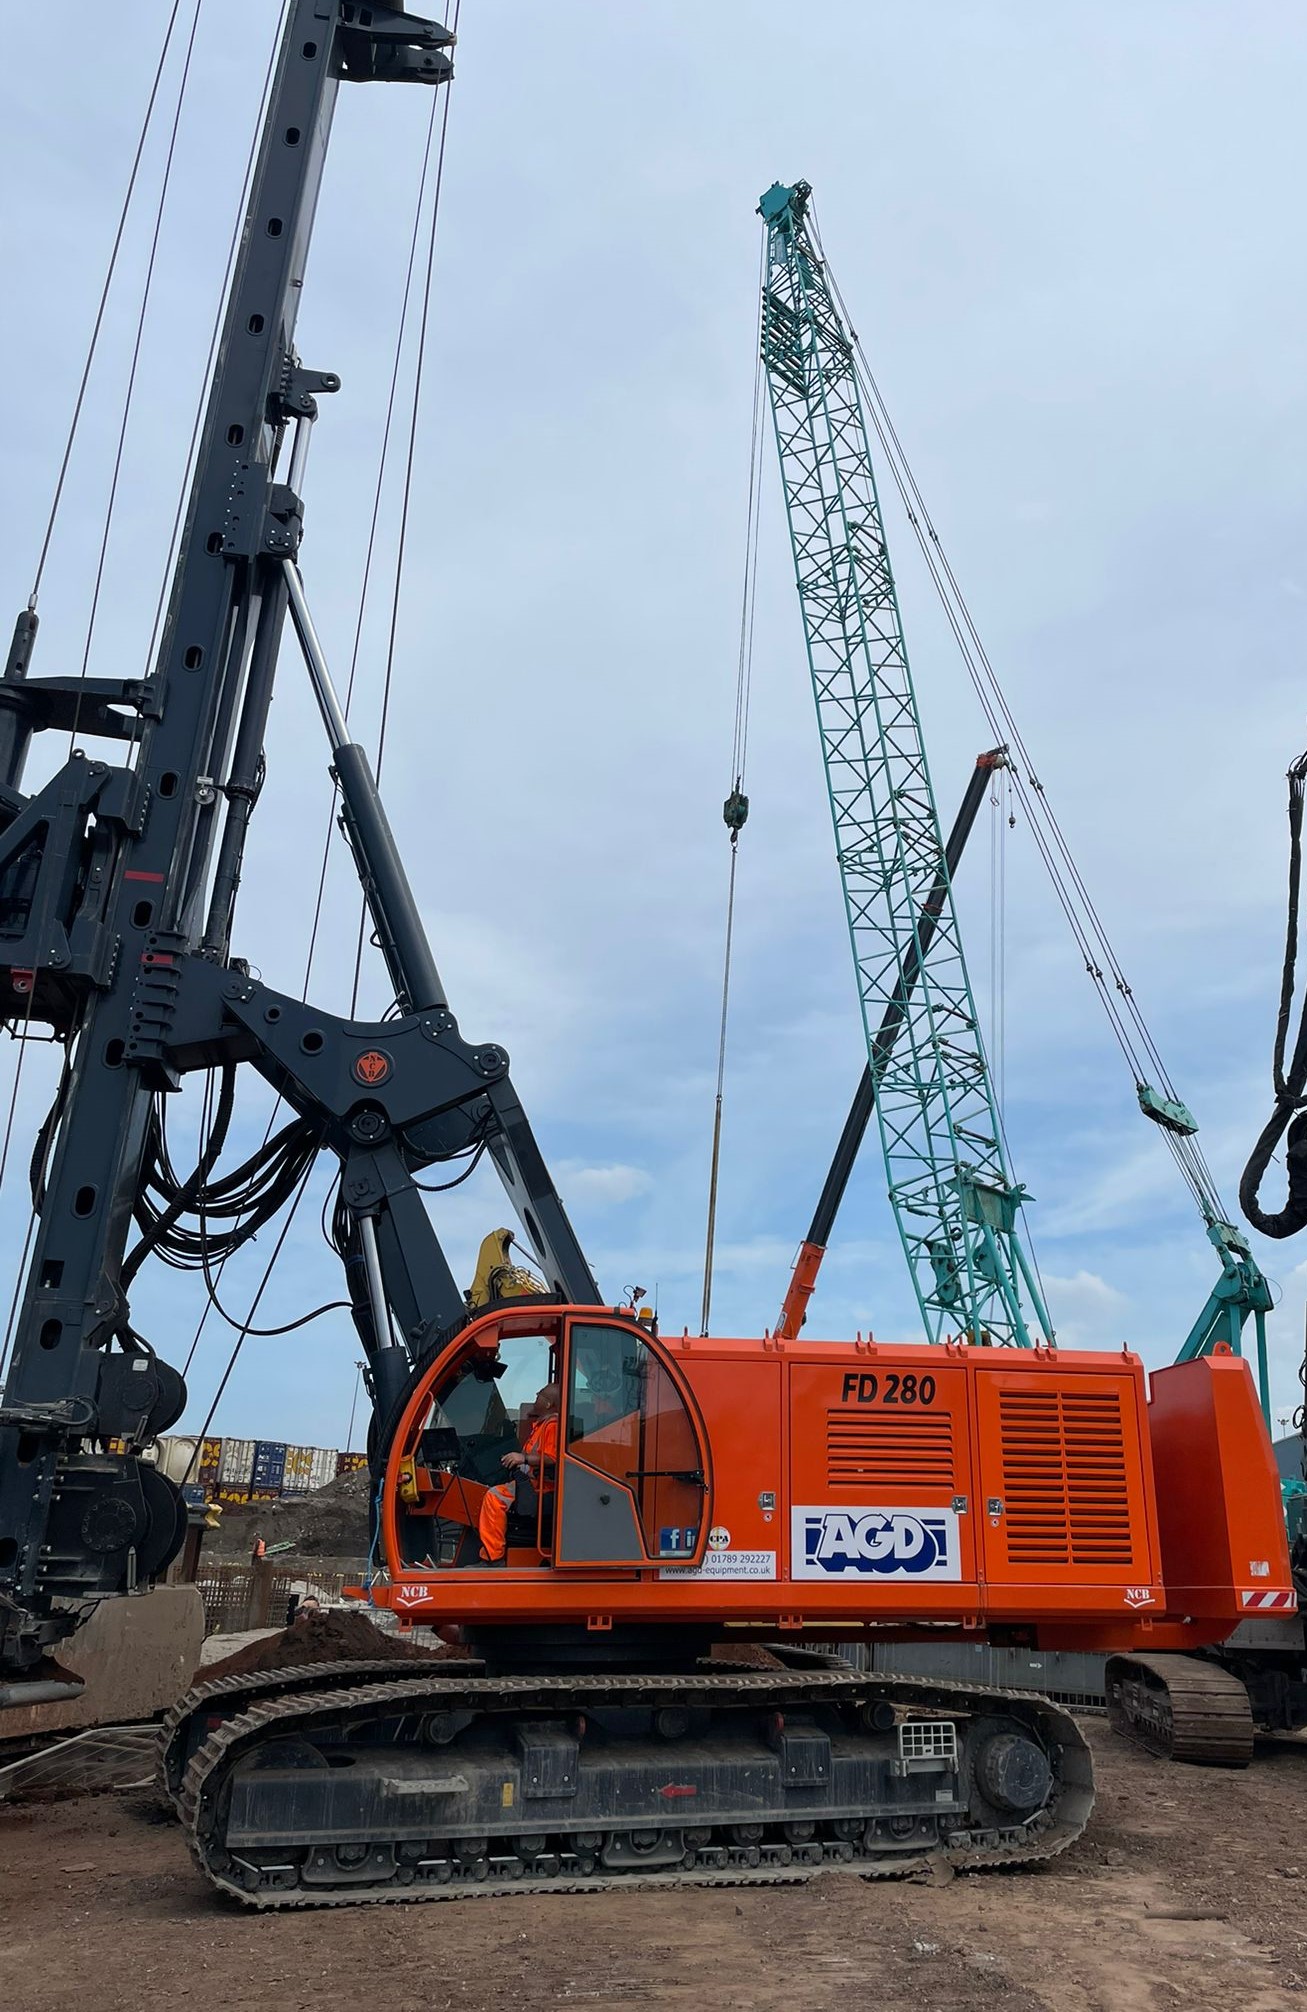 Suppliers of UK Pioneer In Rotary Piling Rig Hire